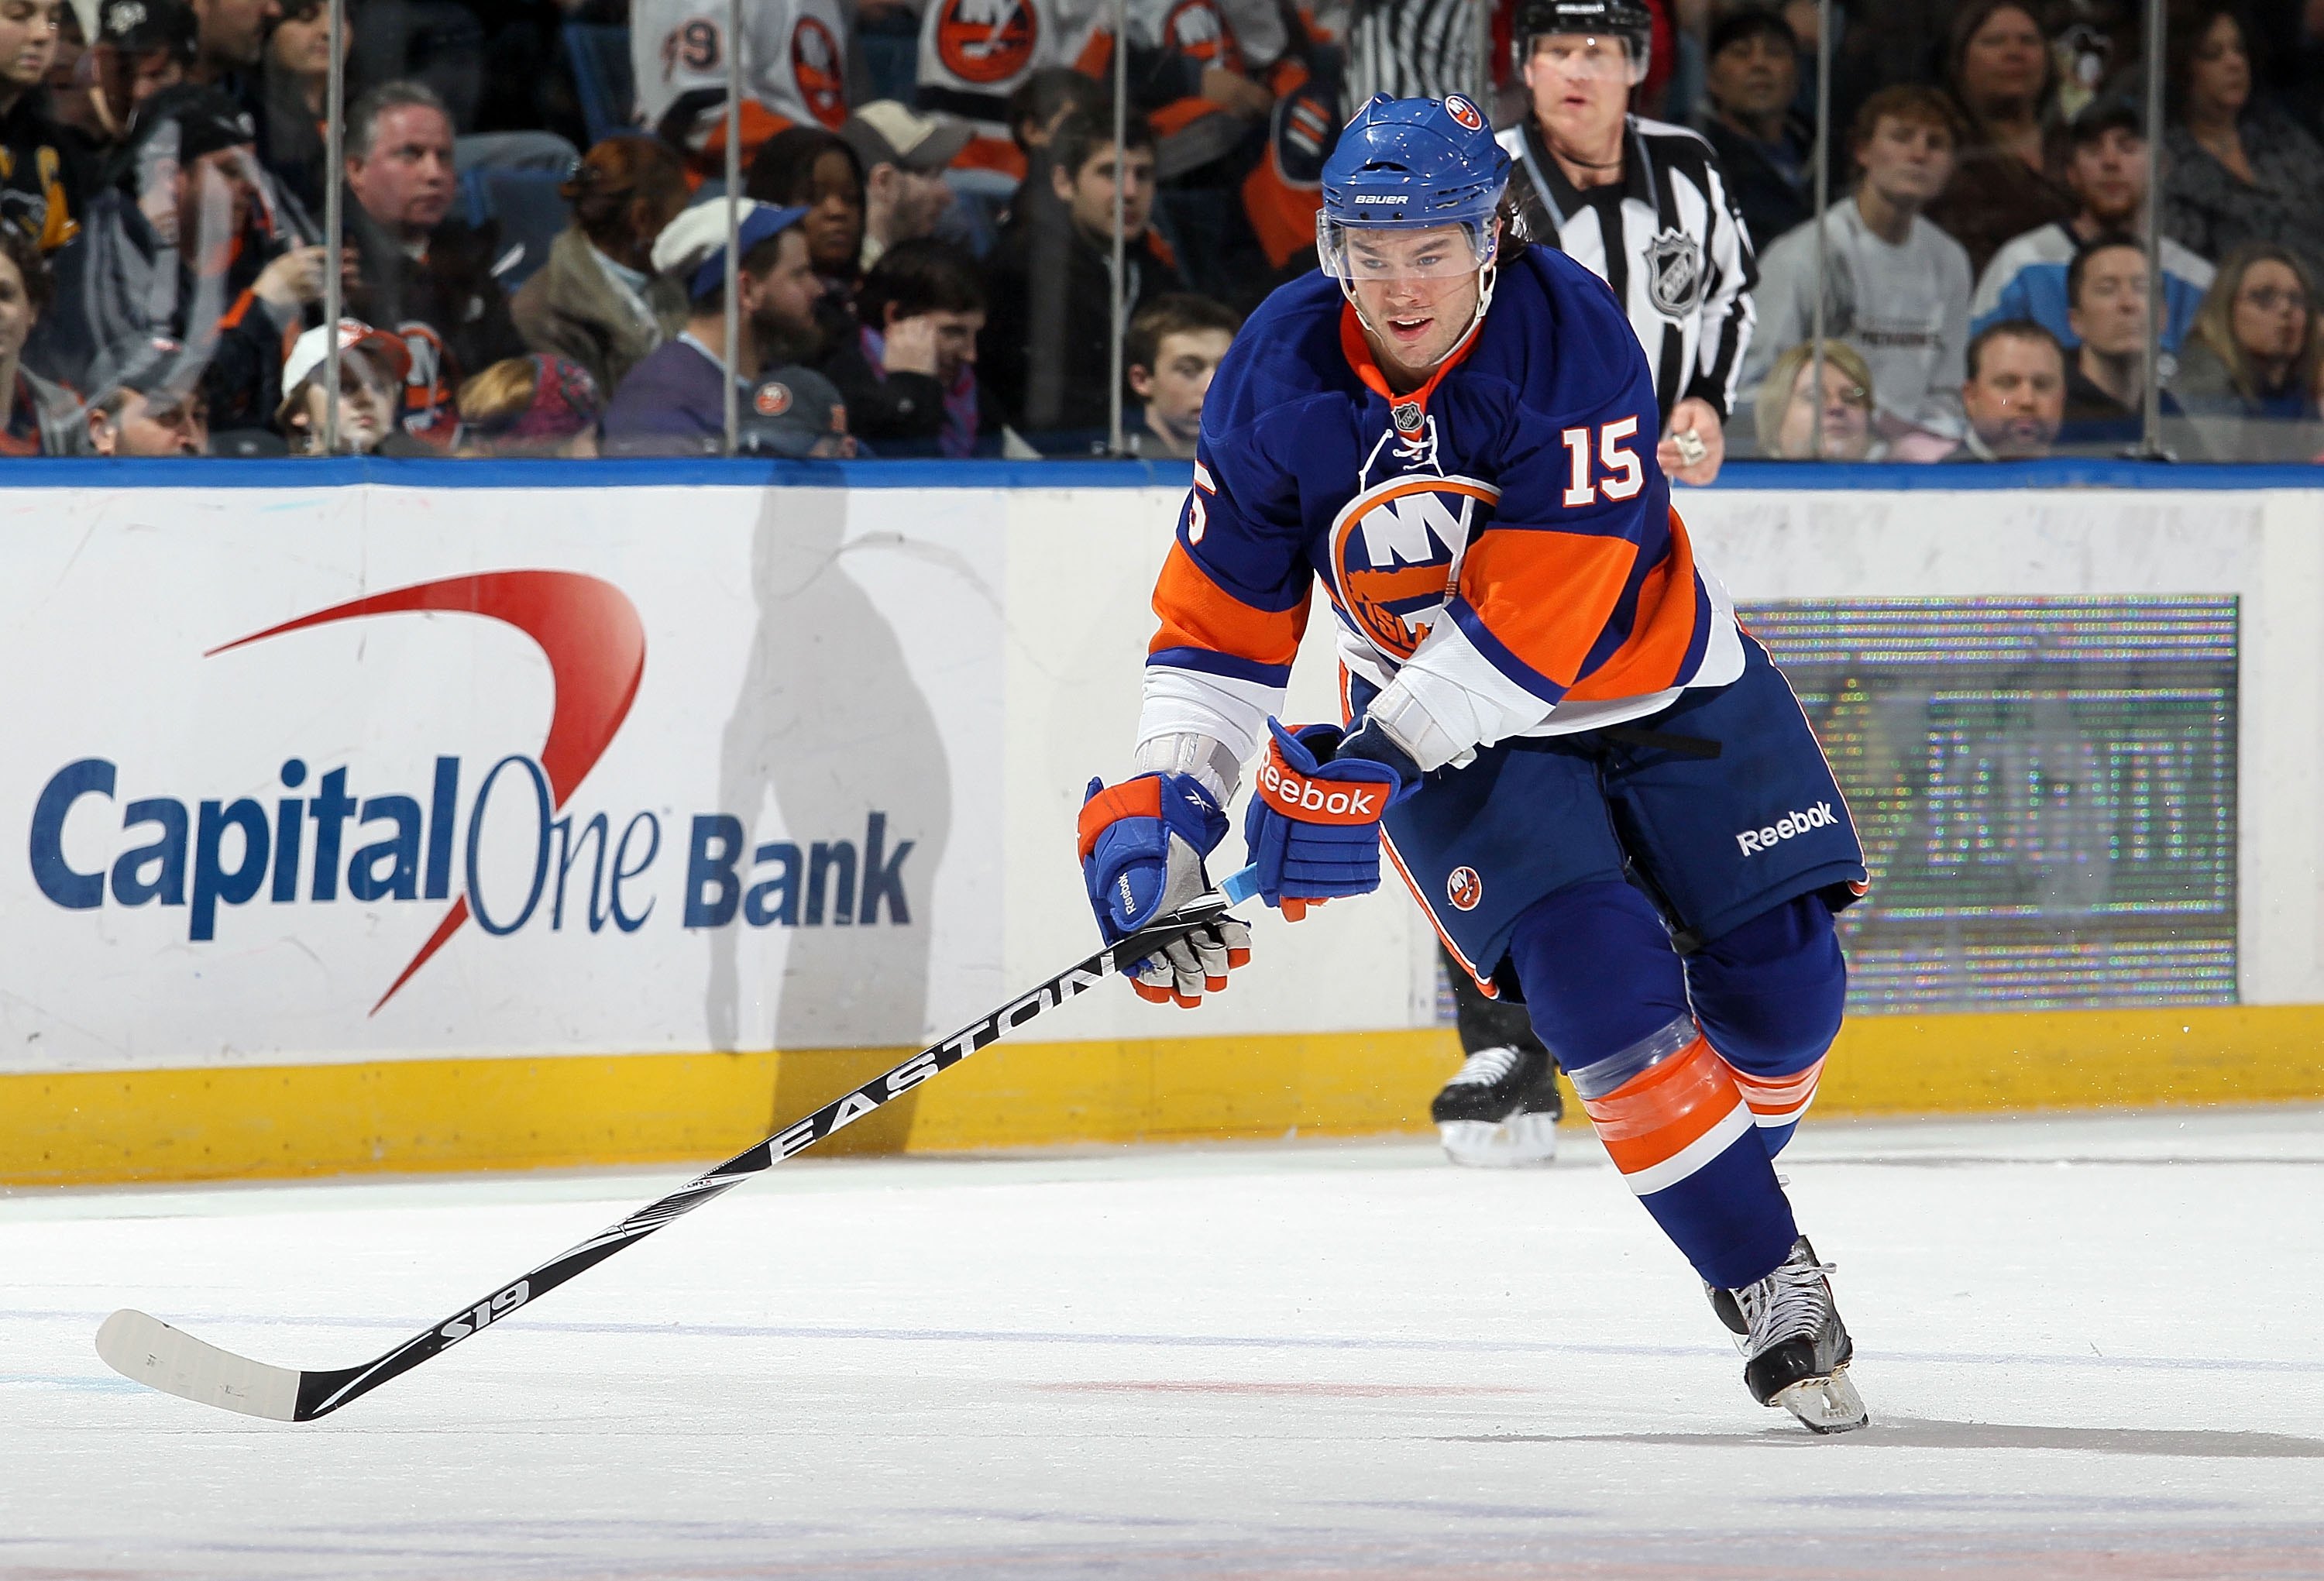 UNIONDALE, NY - FEBRUARY 11:  PA Parenteau #15 of the New York Islanders skates against the Pittsburgh Penguins on February 11, 2011 at Nassau Coliseum in Uniondale, New York. The Isles defeated the Pens 9-3.  (Photo by Jim McIsaac/Getty Images)